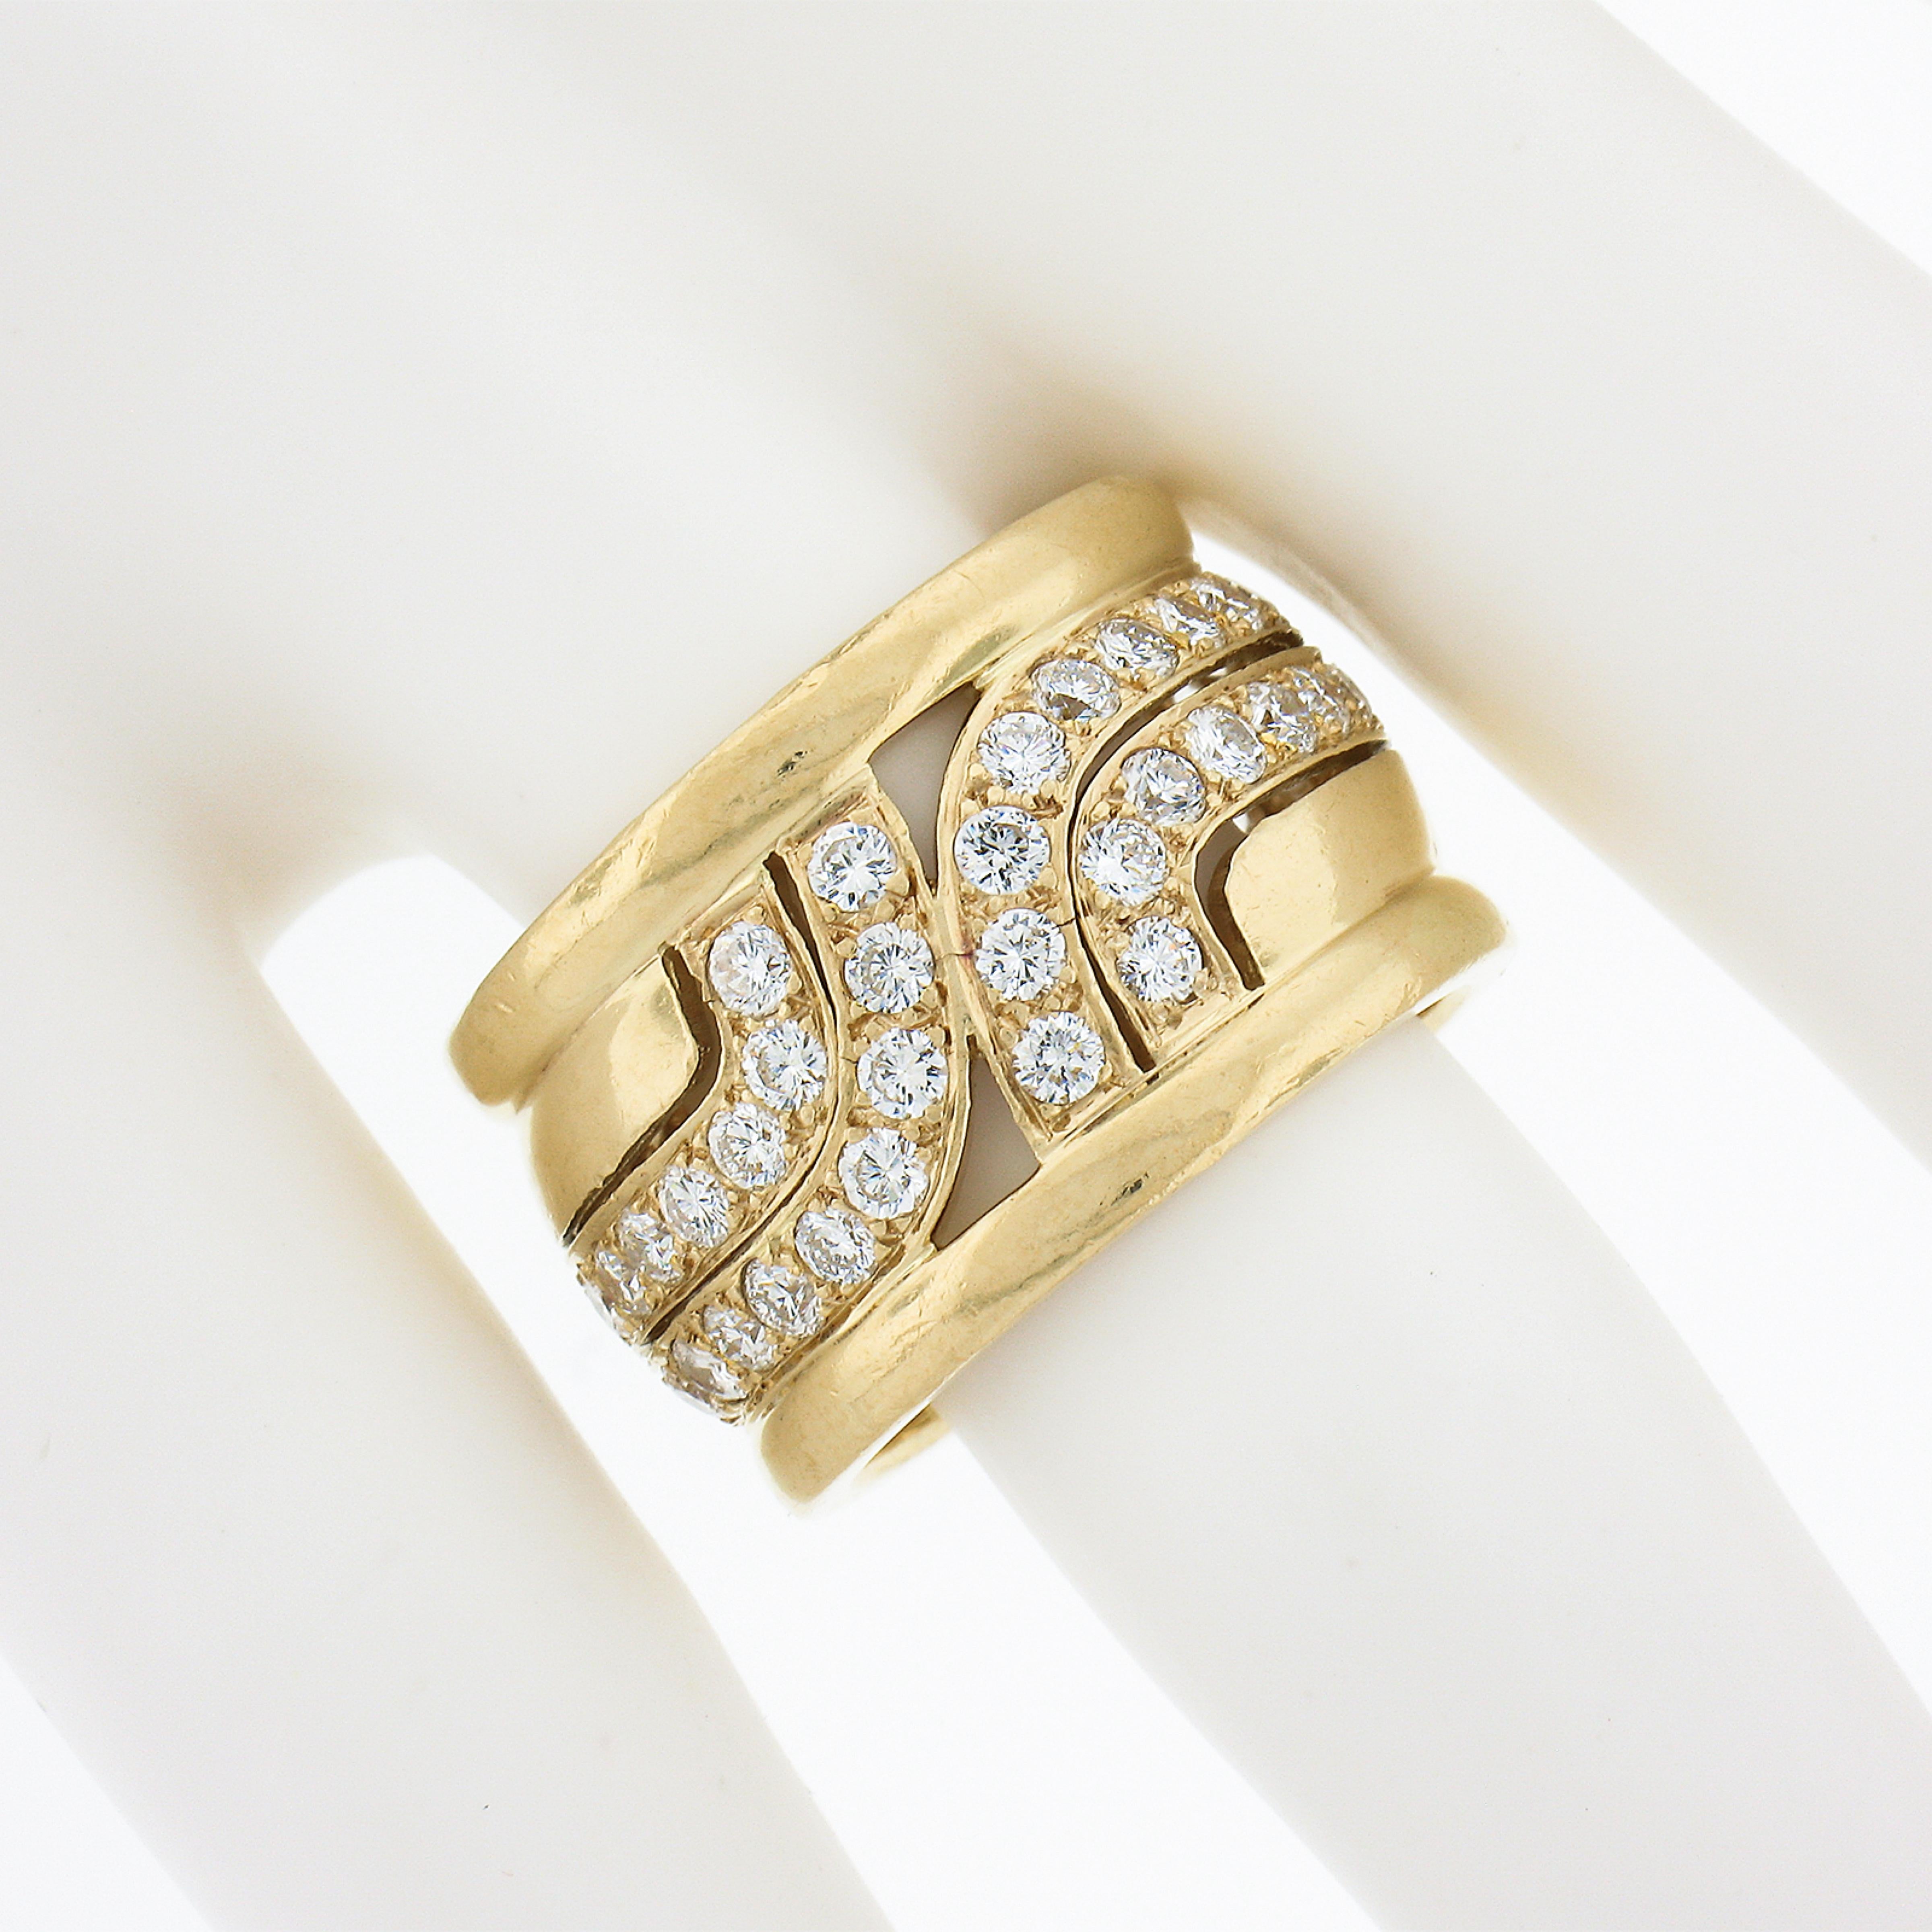 Rare Vintage Cartier 18k Yellow Gold 2.10ctw Diamond Wide Band Ring In Good Condition For Sale In Montclair, NJ